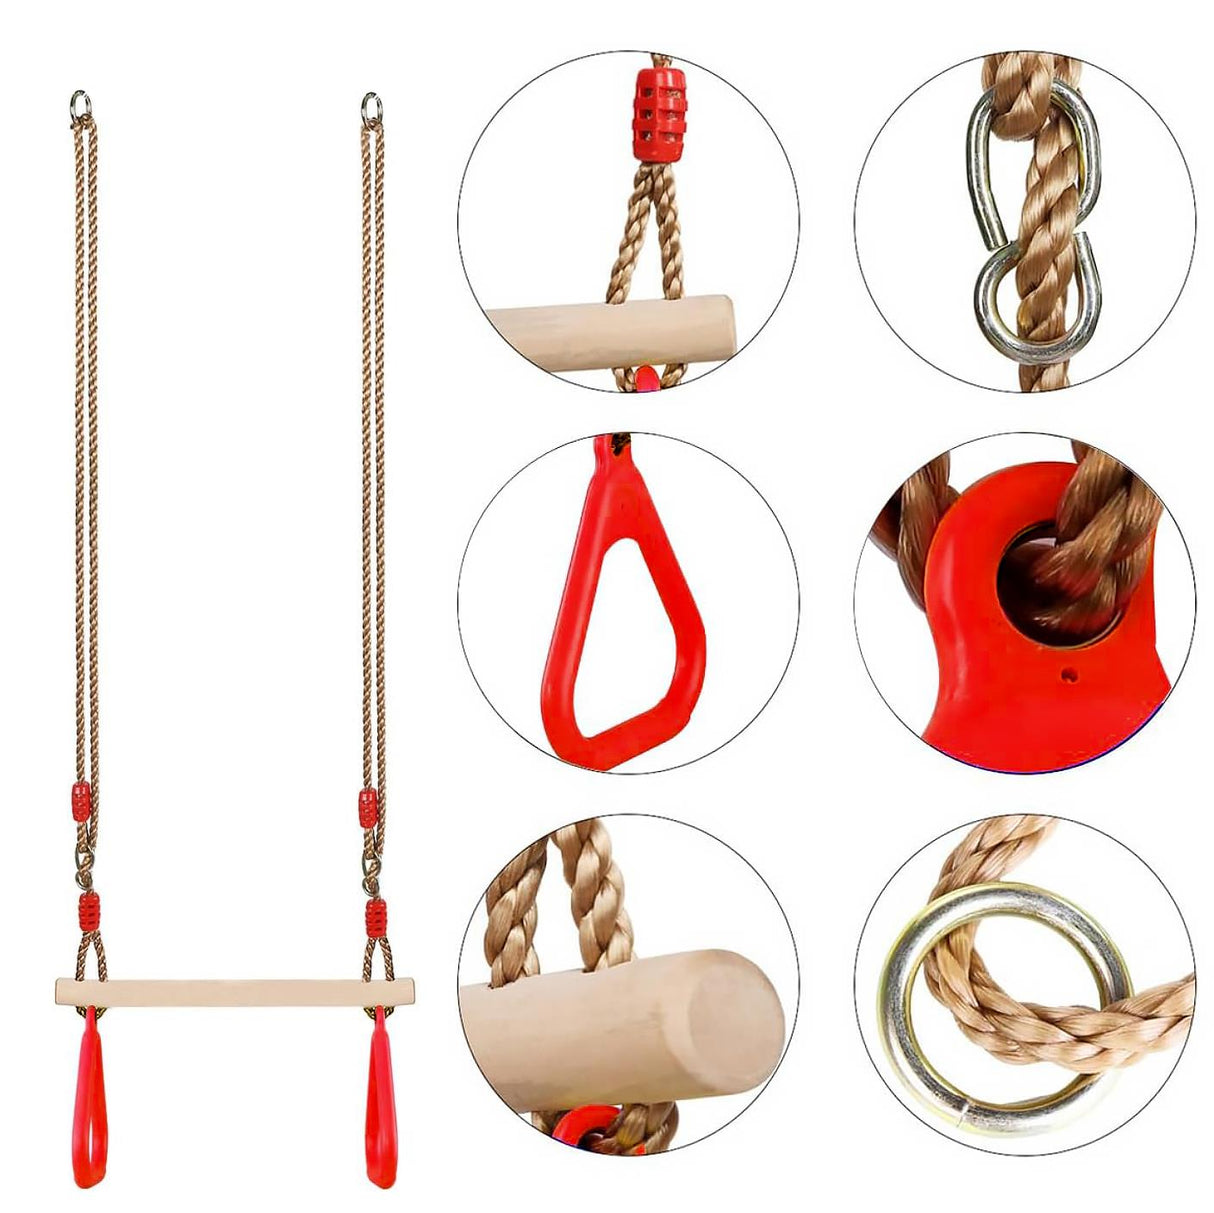 The Magic Toy Shop Set of Trapeze Monkey Bar and Plastic Swing Seat